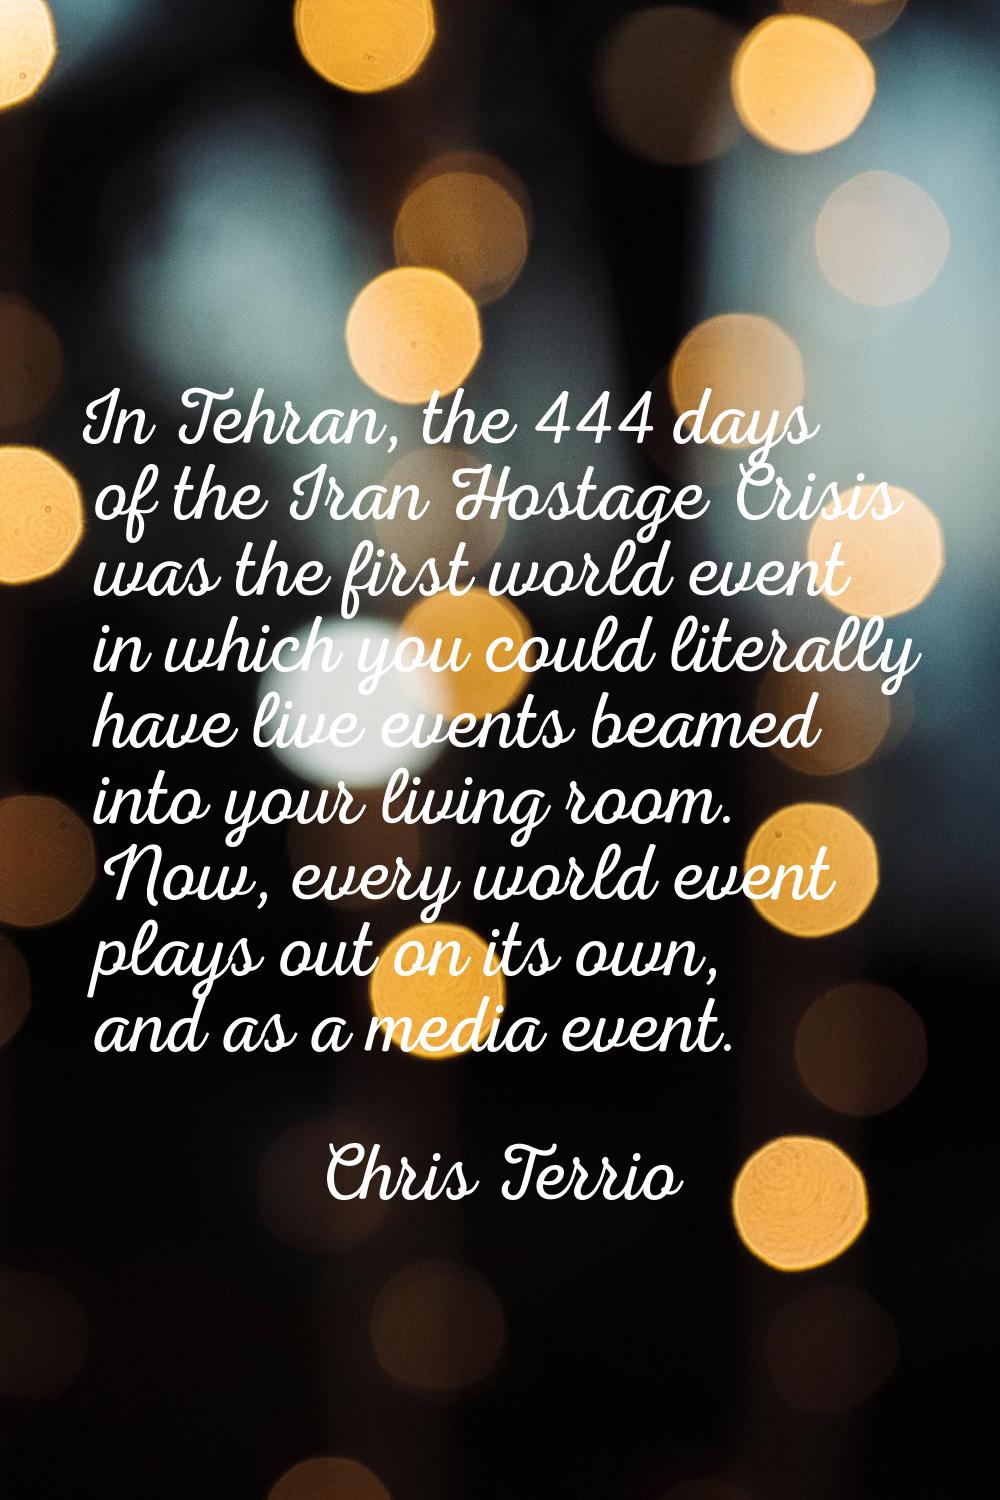 In Tehran, the 444 days of the Iran Hostage Crisis was the first world event in which you could lit